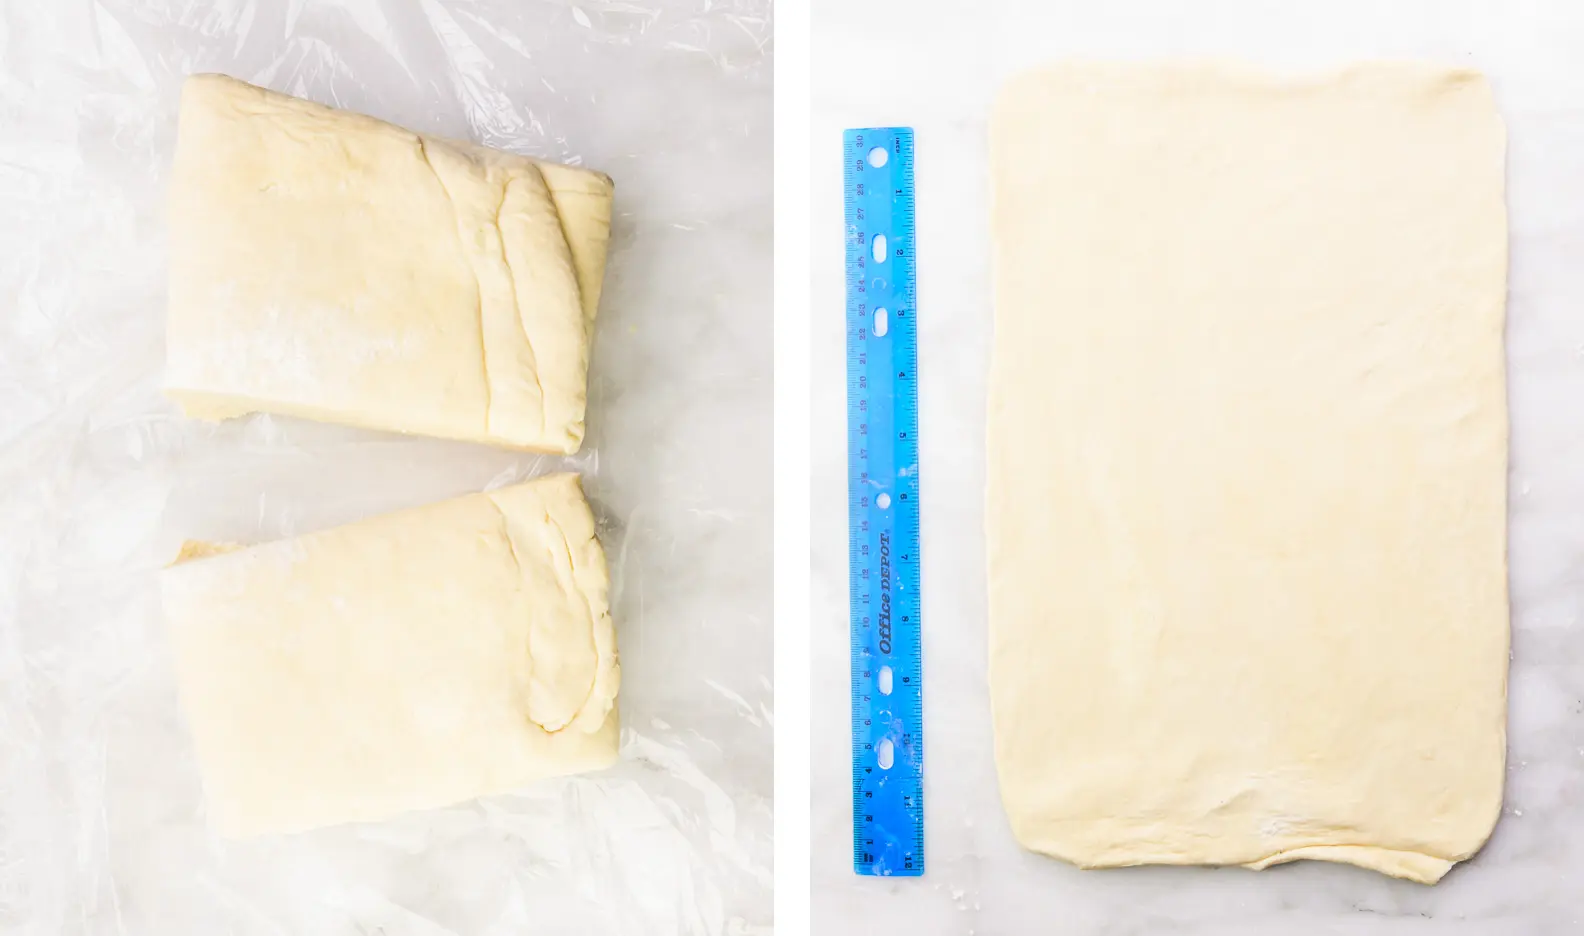 A collage of two images shows a rectangle of dough cut in half on the left. On the right dough has been rolled out into a rectangle alongside a blue ruler.